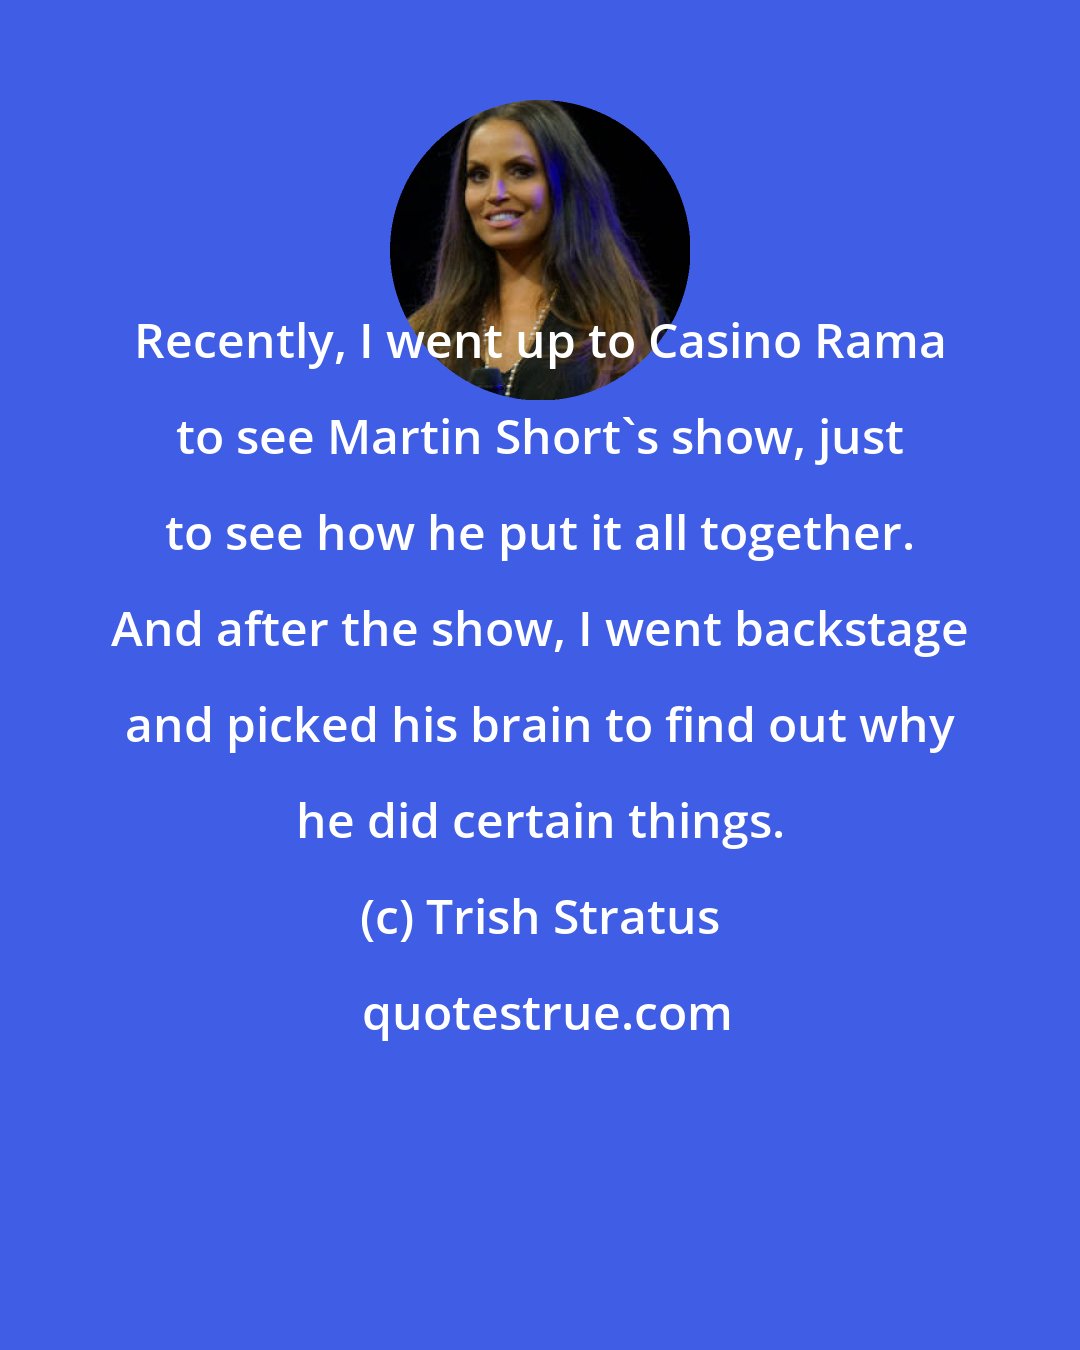 Trish Stratus: Recently, I went up to Casino Rama to see Martin Short's show, just to see how he put it all together. And after the show, I went backstage and picked his brain to find out why he did certain things.